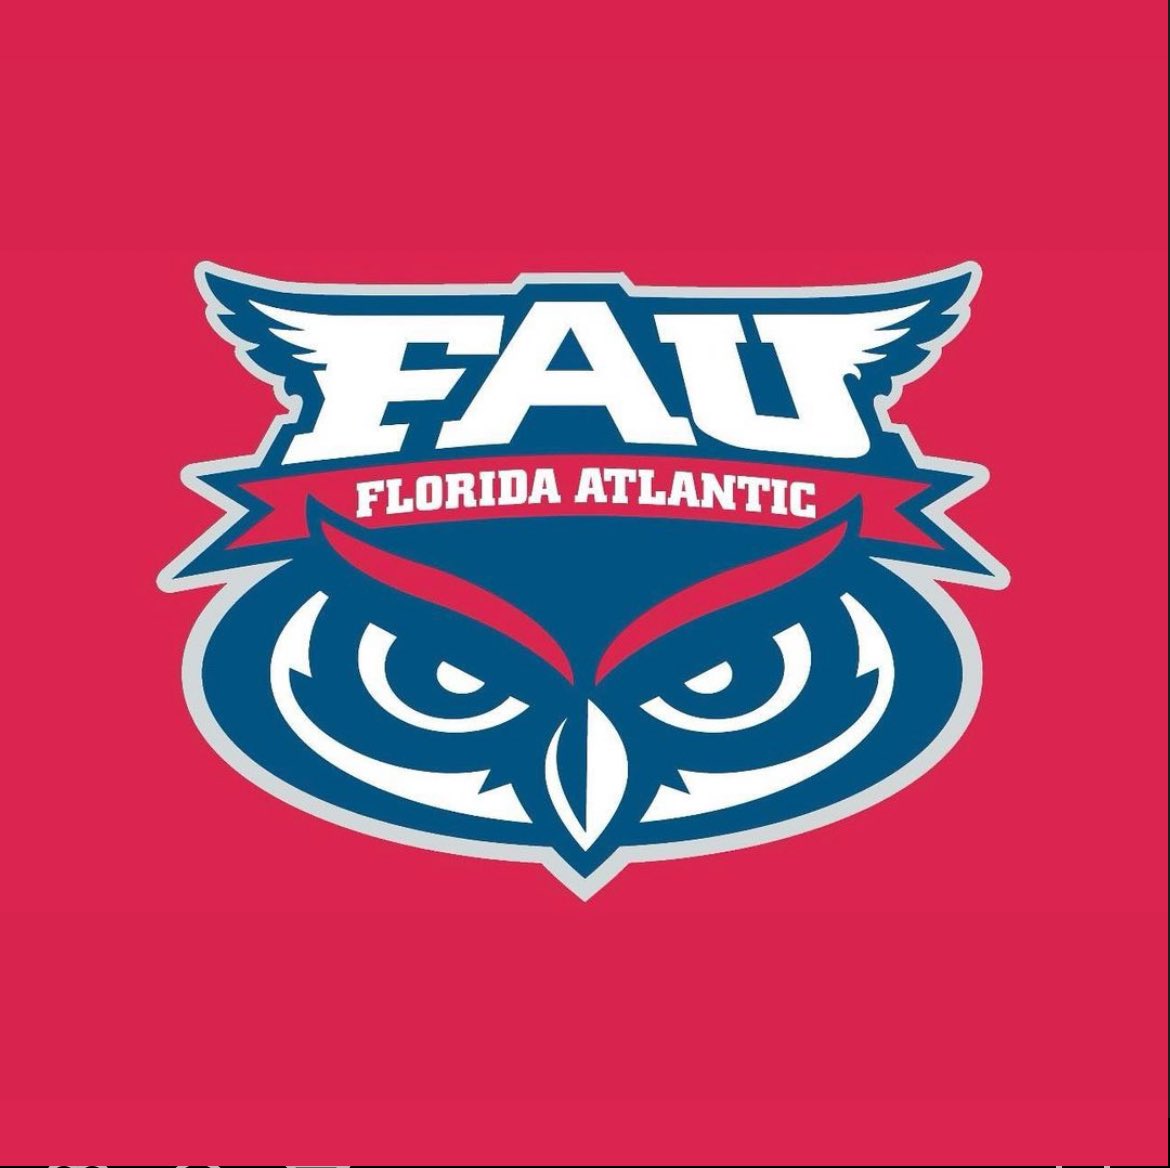 Blessed to receive an offer from Florida Atlantic University! 🔴🔵 @FAUFootball @theridgefb @LifeCoachPierre @CoachDLMike @CoachNickRod @CoachTravMoore @SRSpartanNation